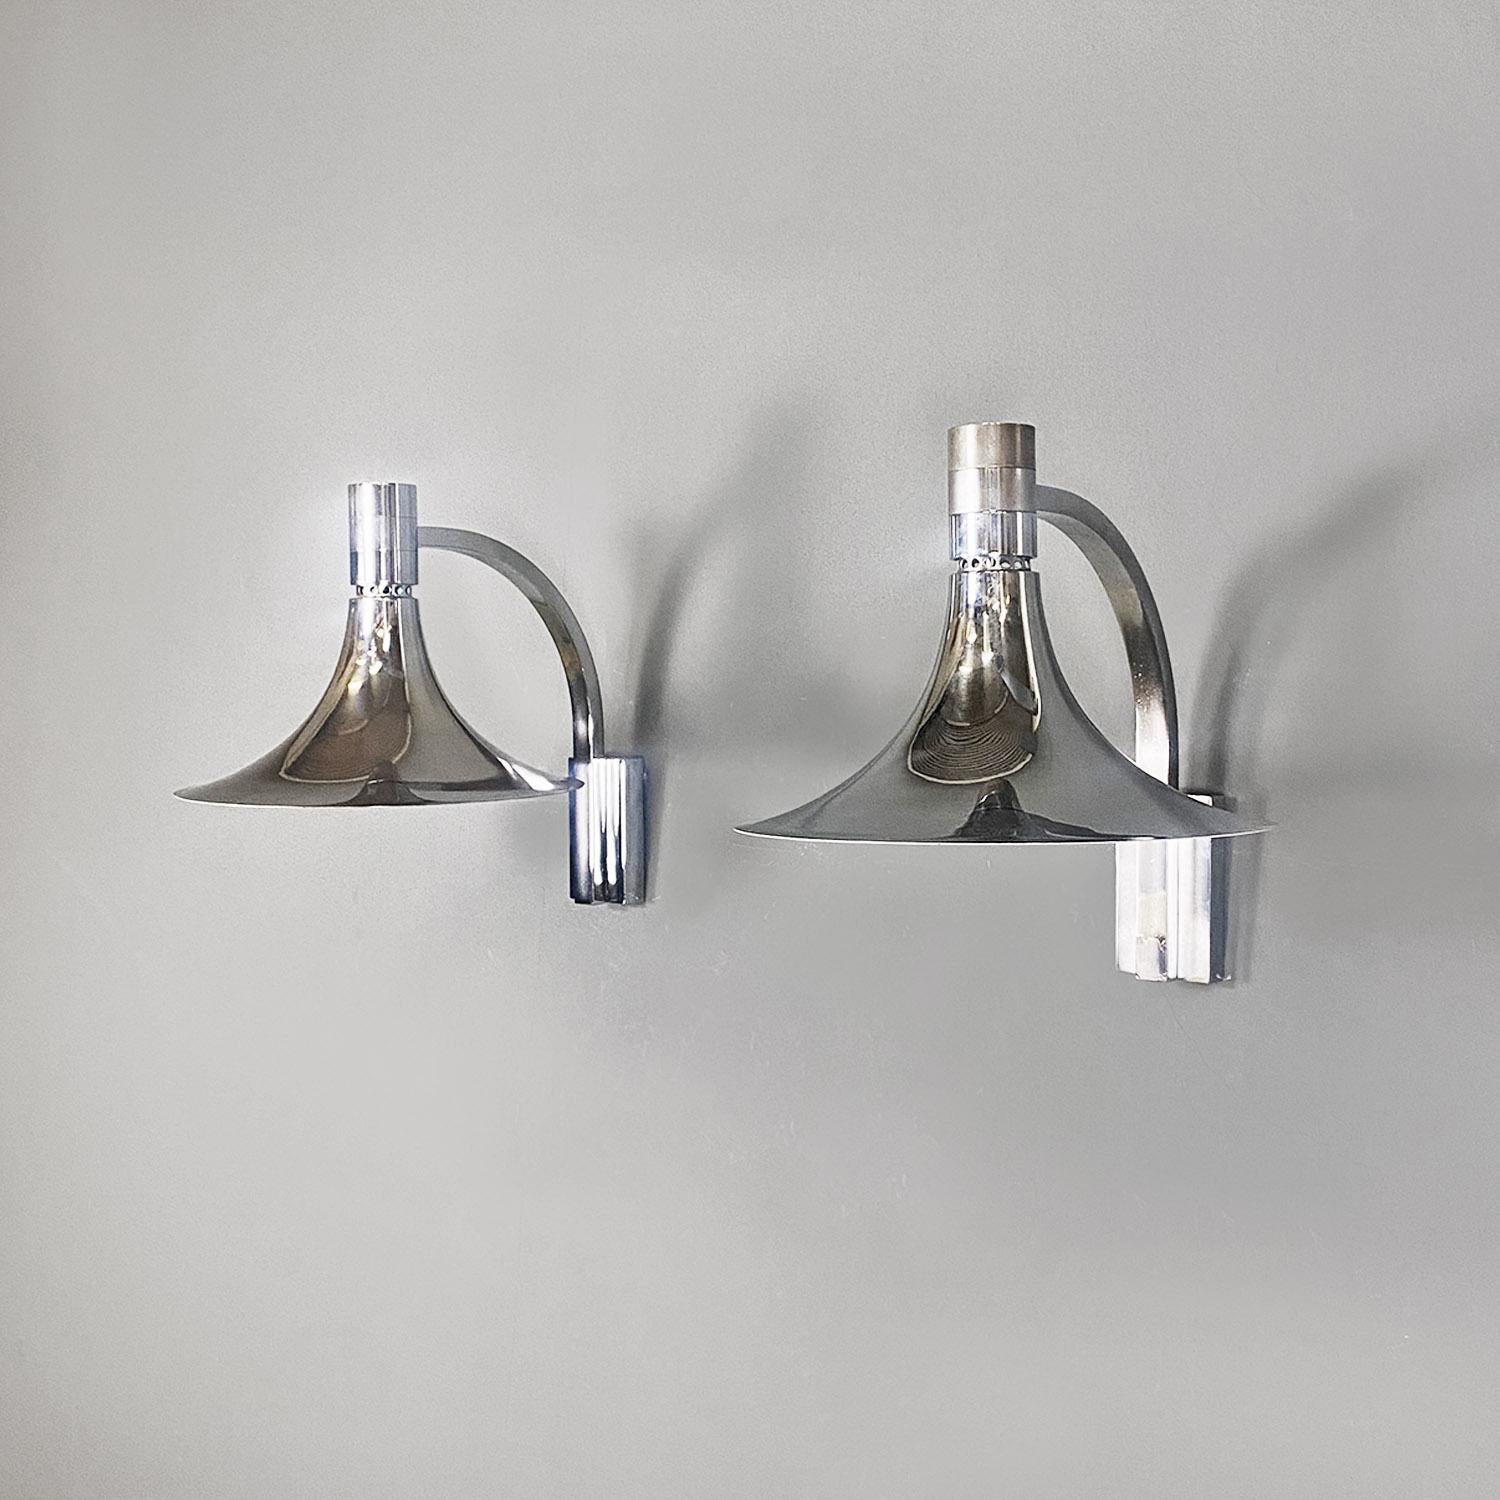 Pair of wall sconces or wall lamps belonging to the AM/AS series with a chromed steel frame, composed of a curved arm with a square section and shade also made of chromed steel on the outside and matte white enamel on the inside, with differences on